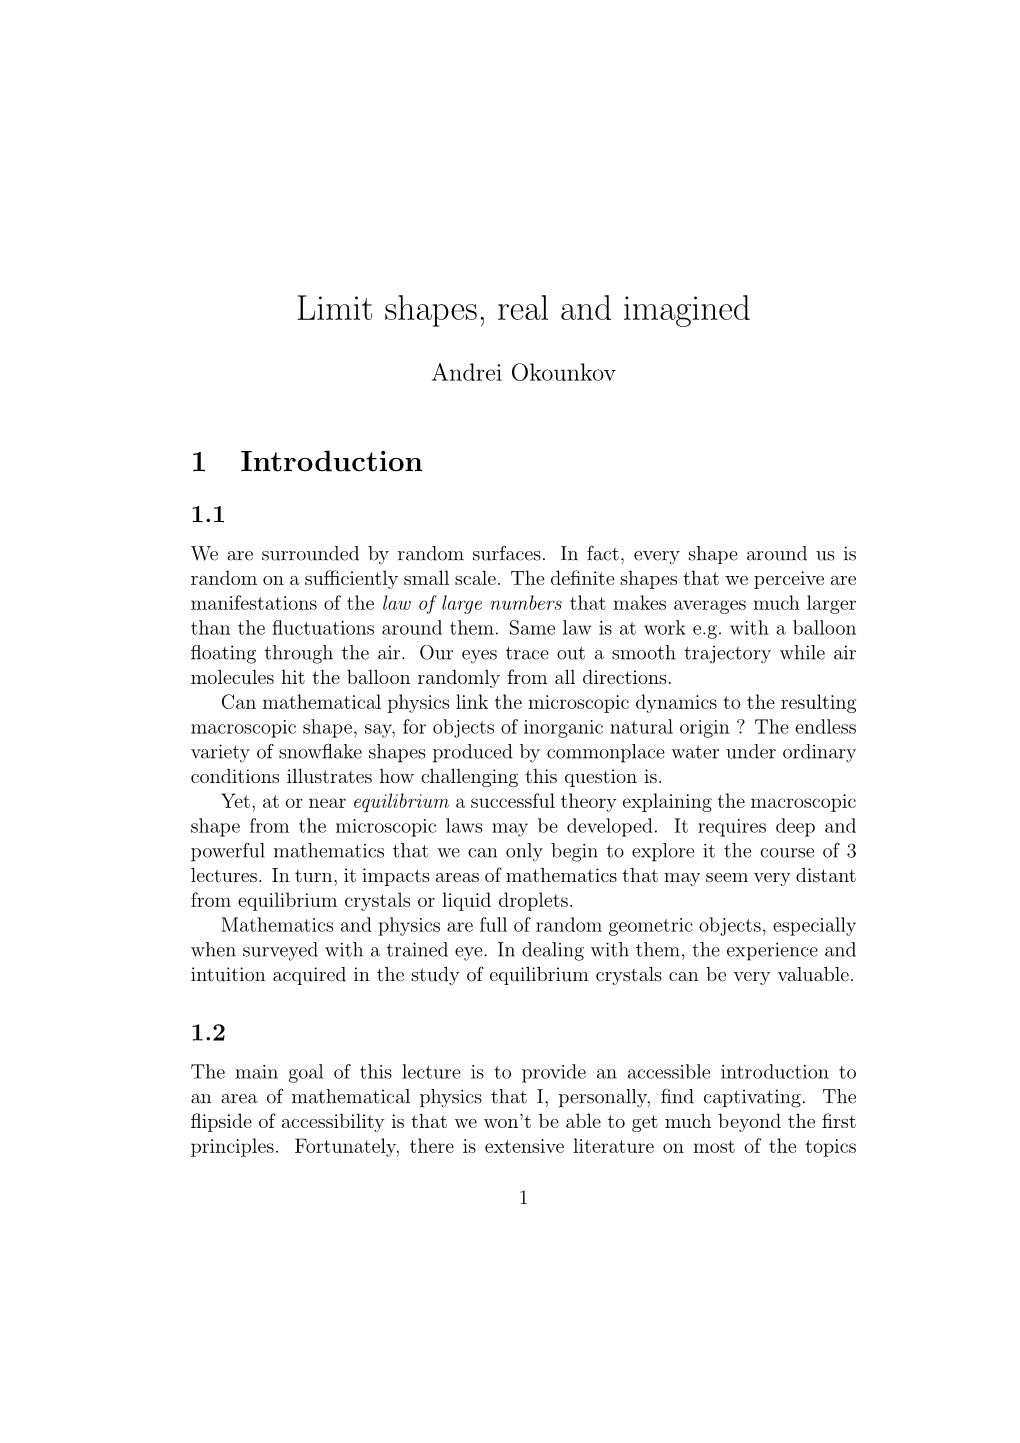 Limit Shapes, Real and Imagined